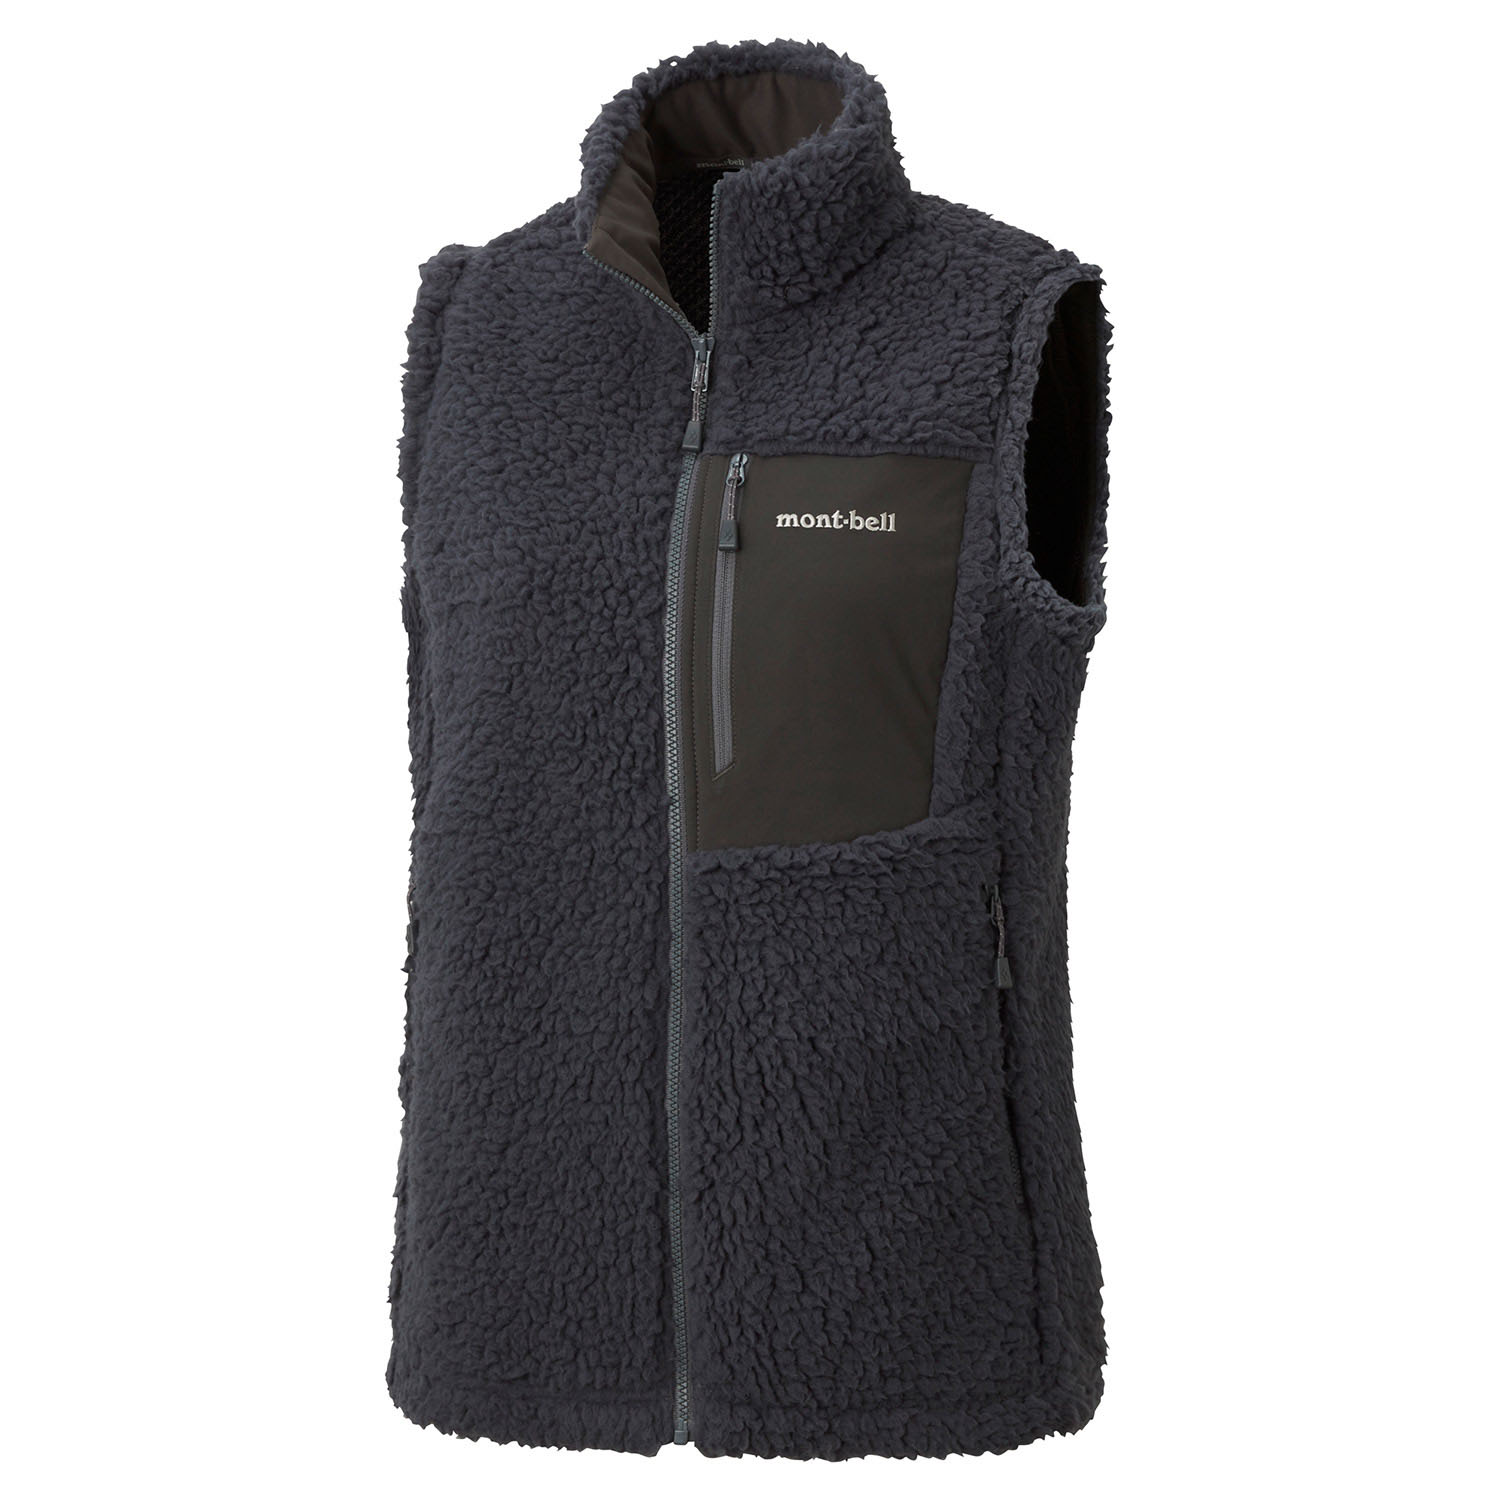 CLIMAPLUS Shearling Vest Women's | Montbell Euro